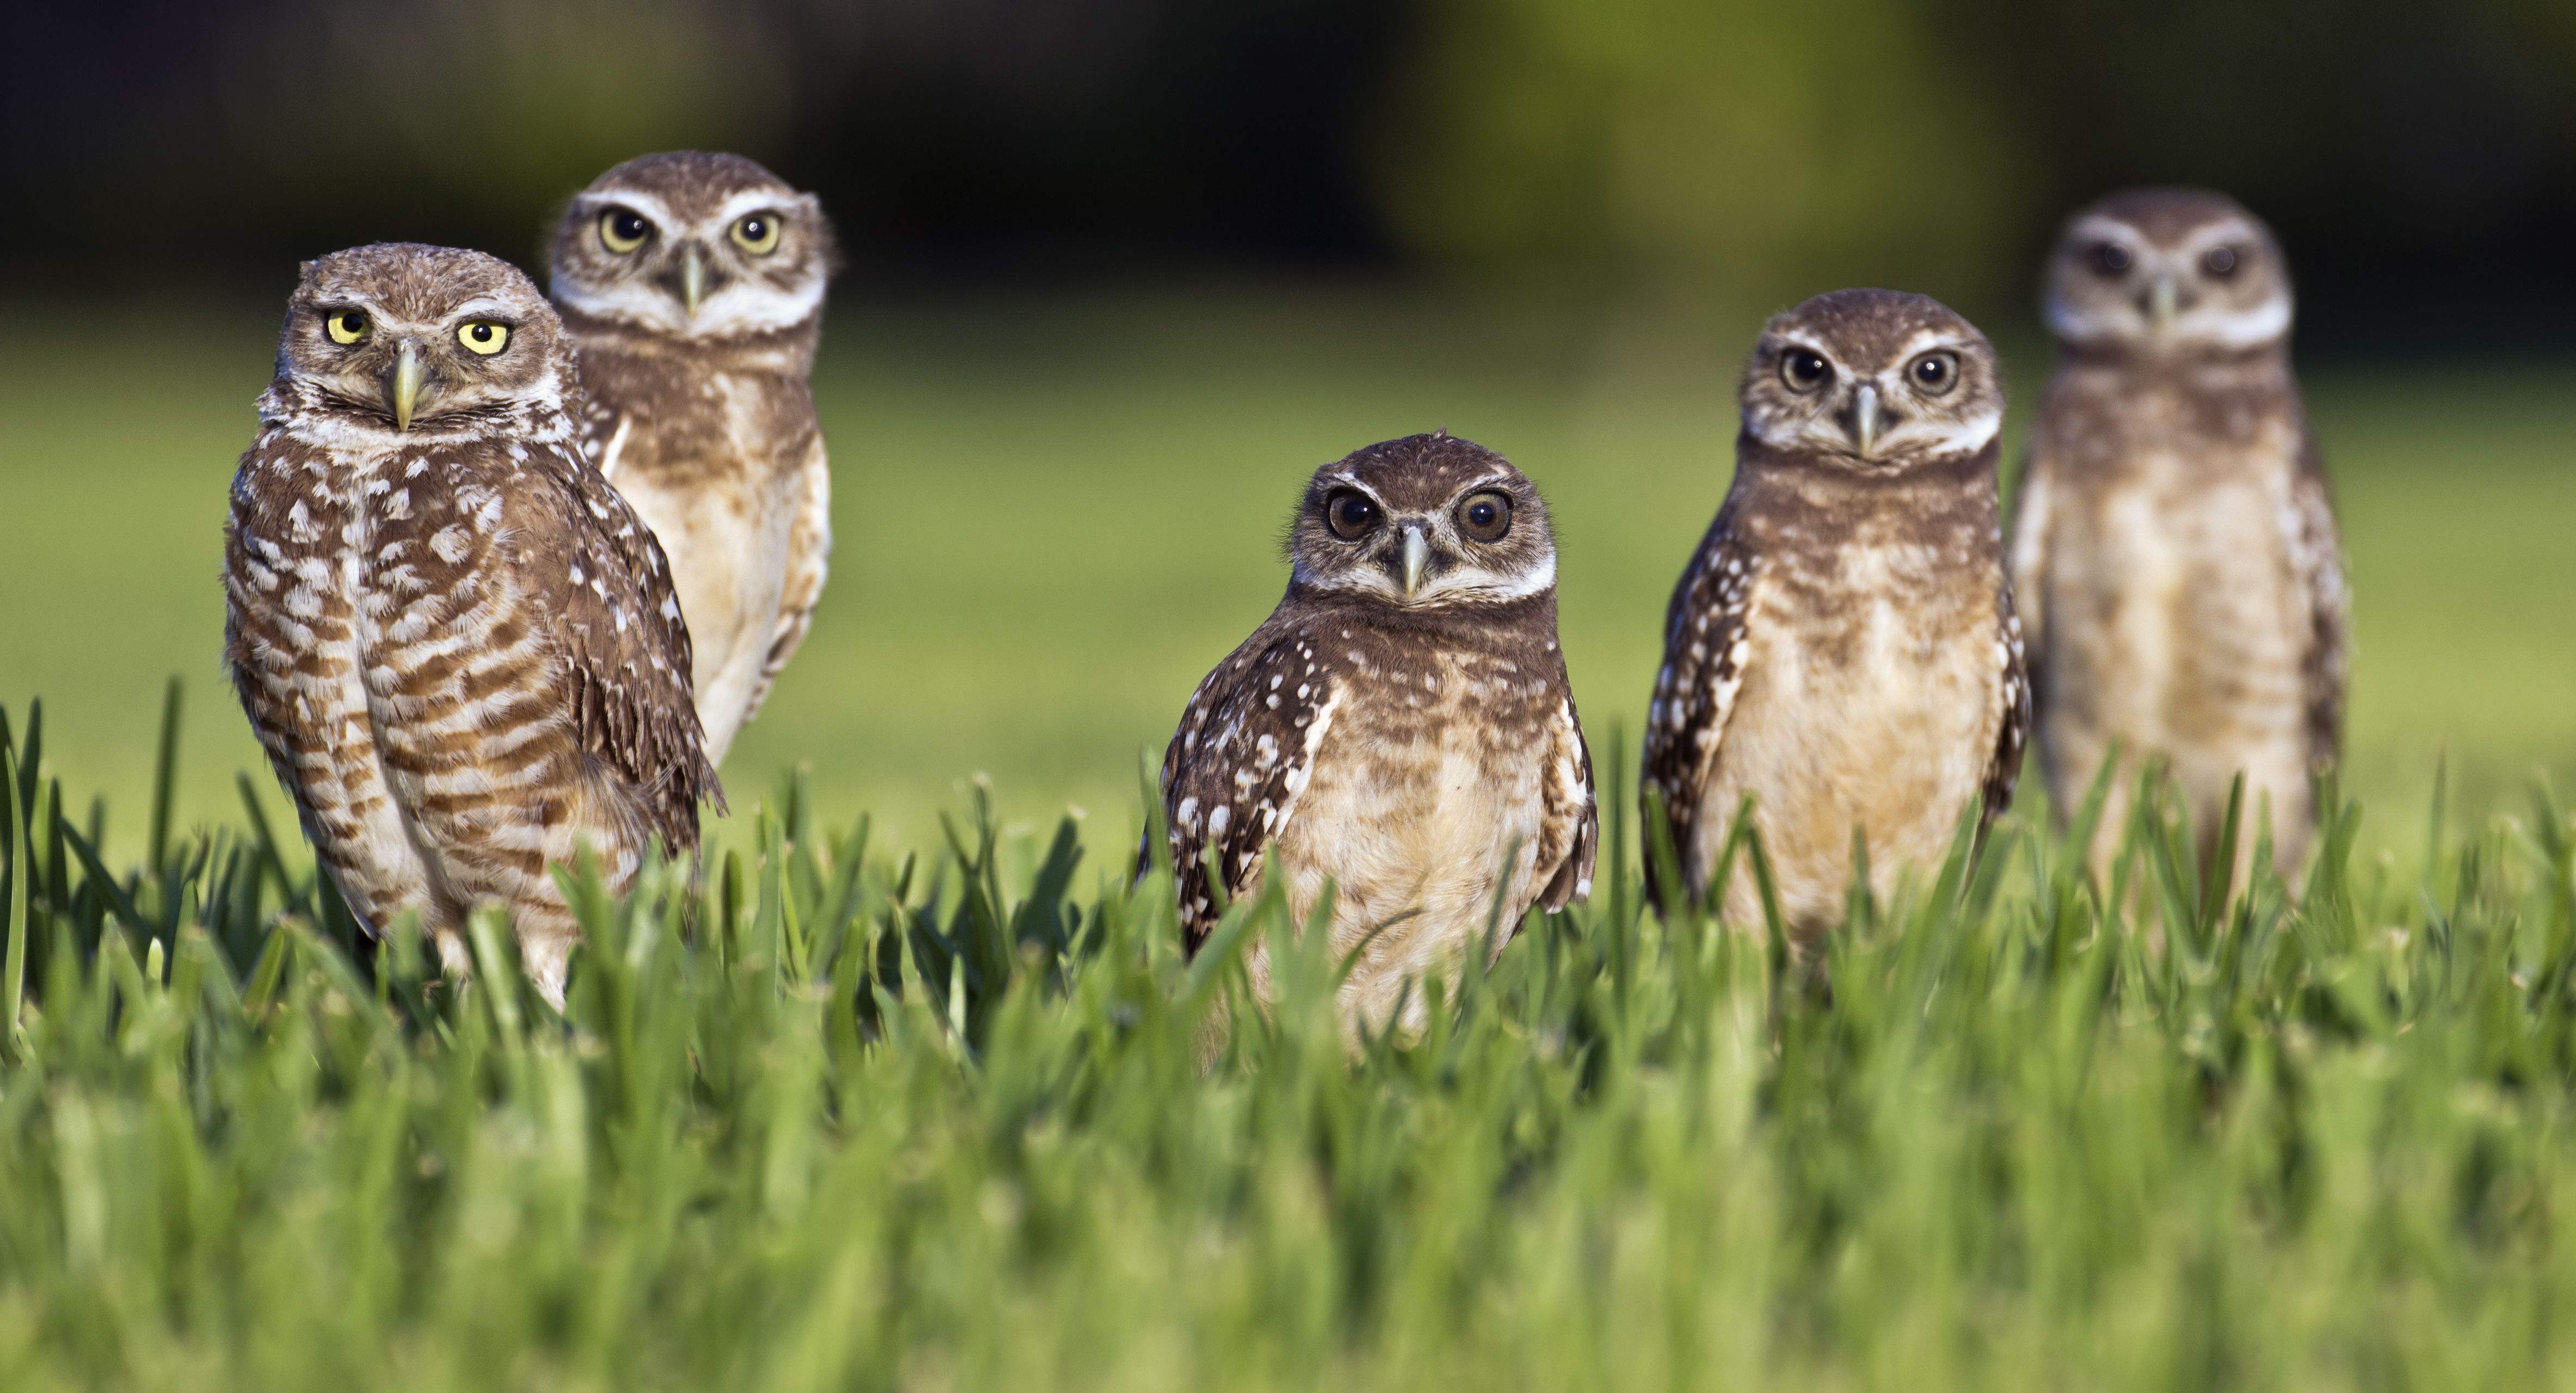 Group of burrowing owls is called a parliament photo